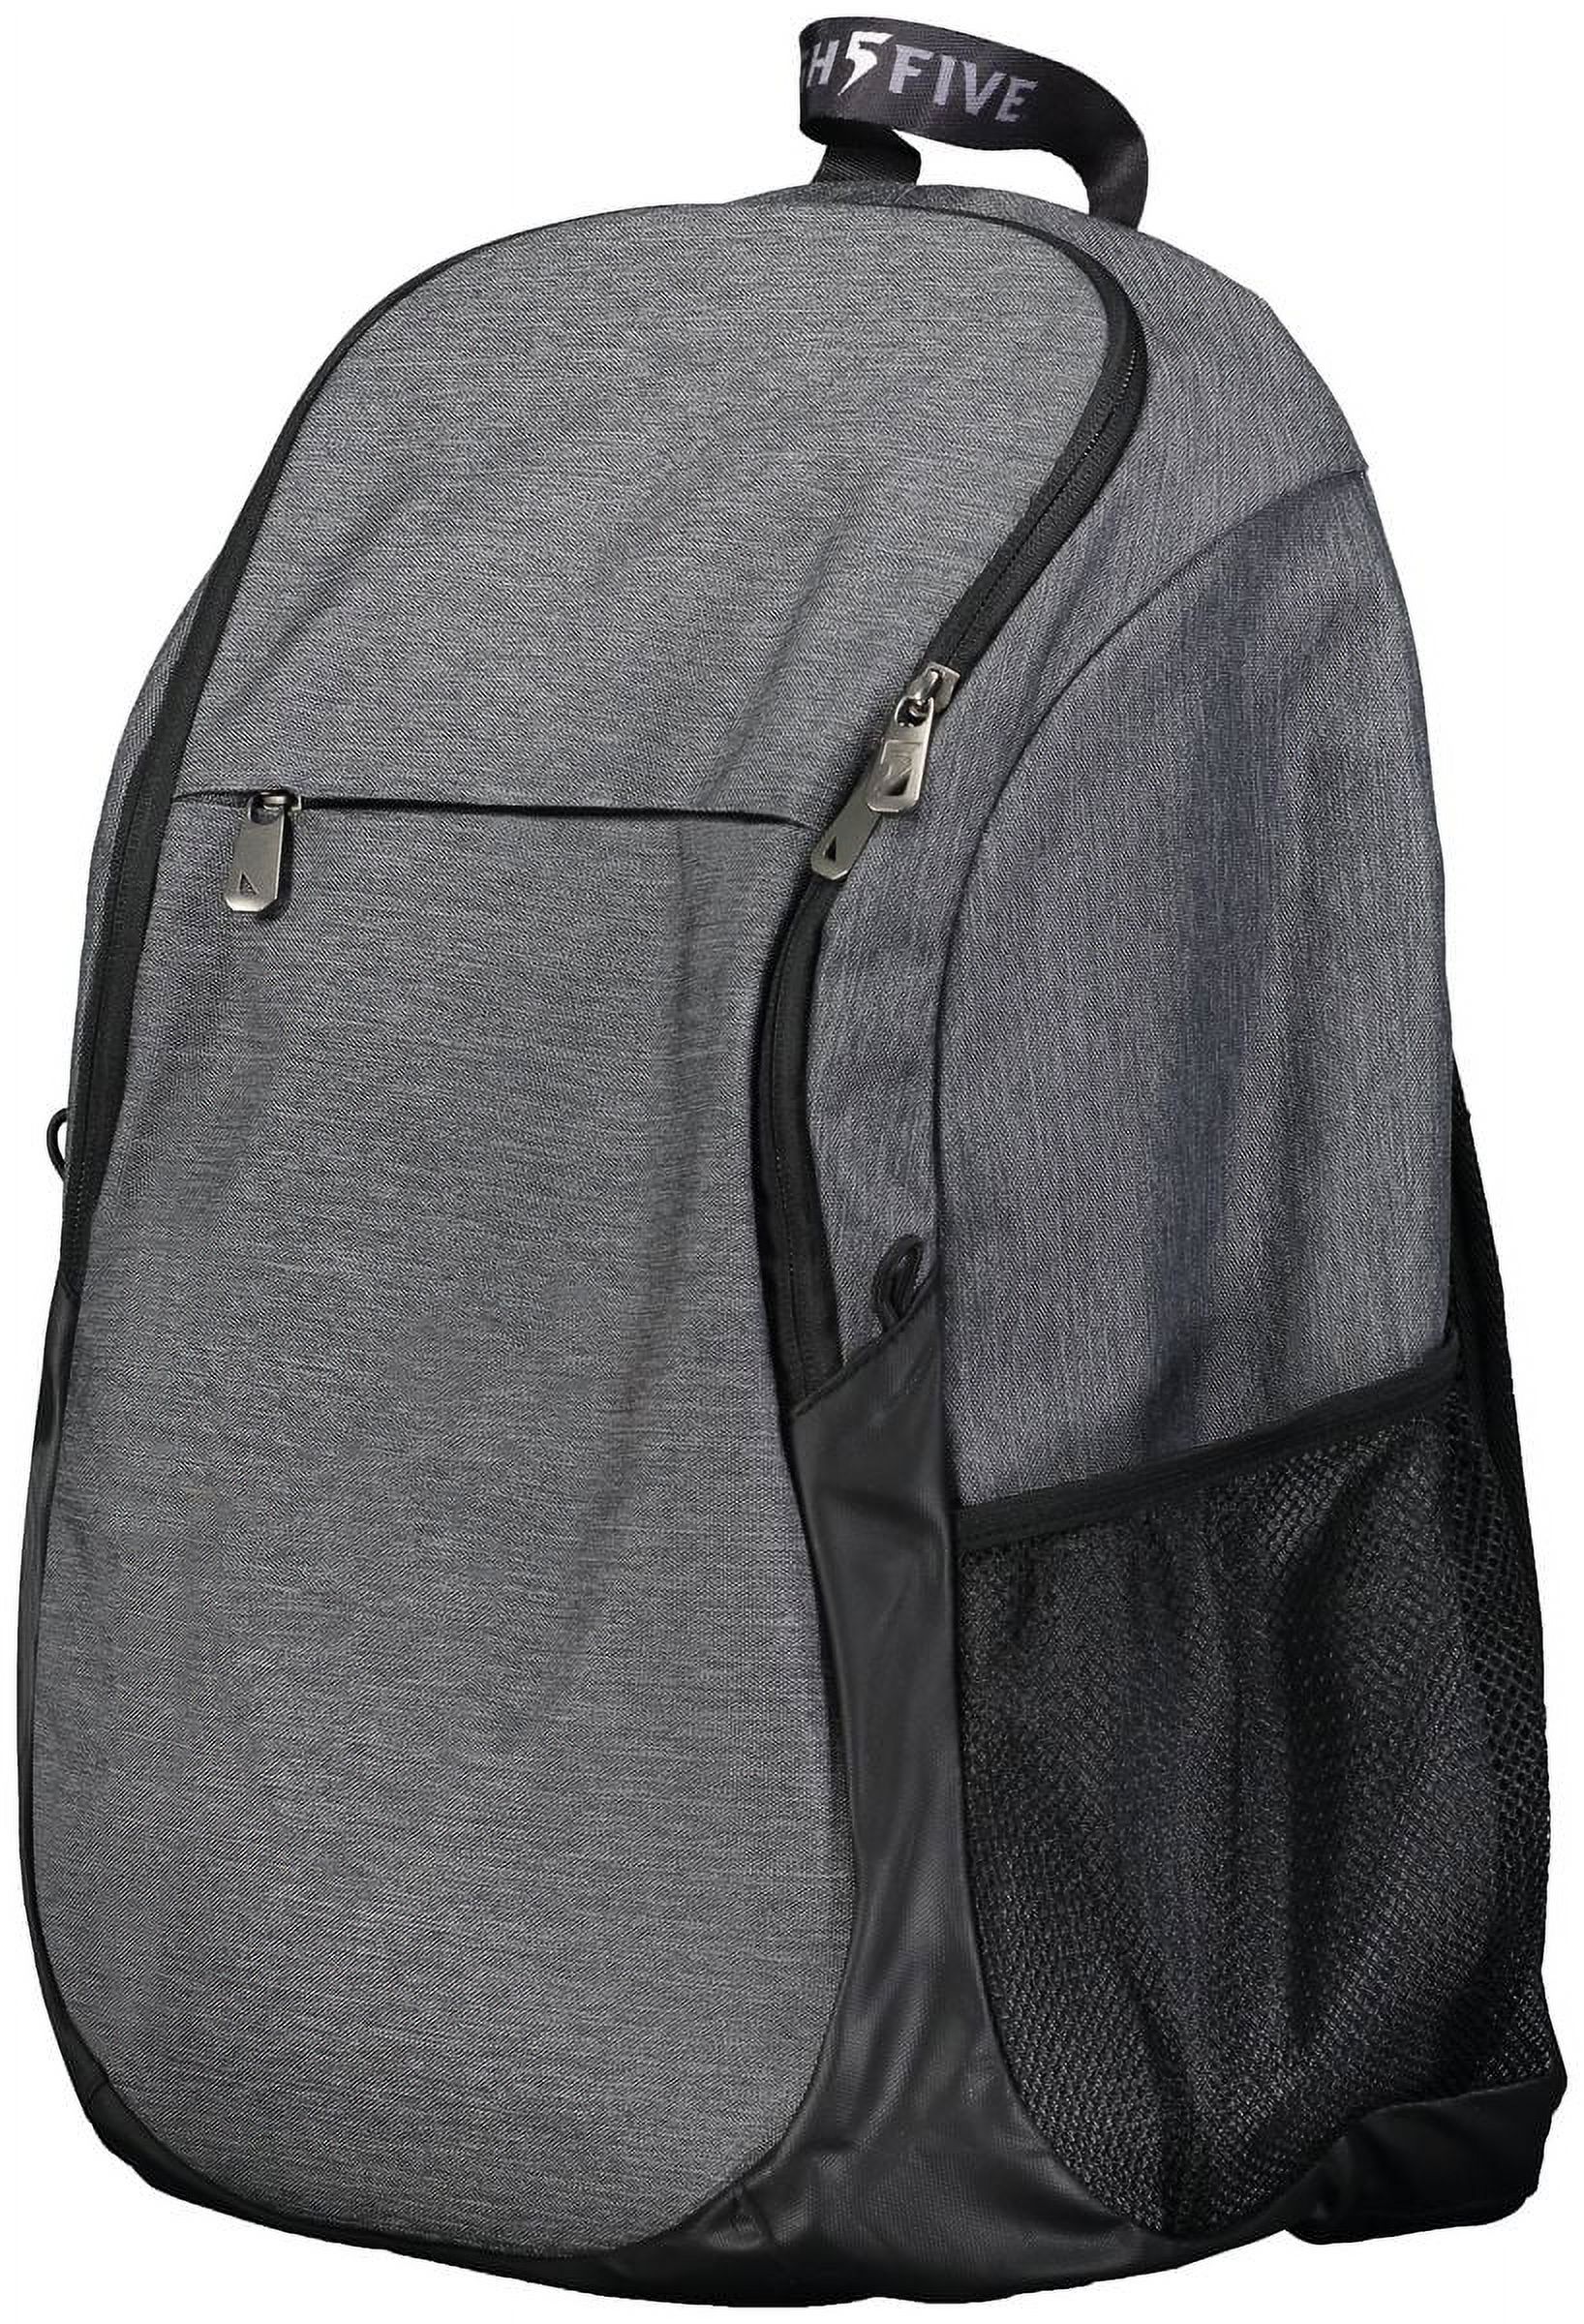 High Five 327895.E83.OS Free Form Backpack, Carbon Heather - One Size - image 5 of 5